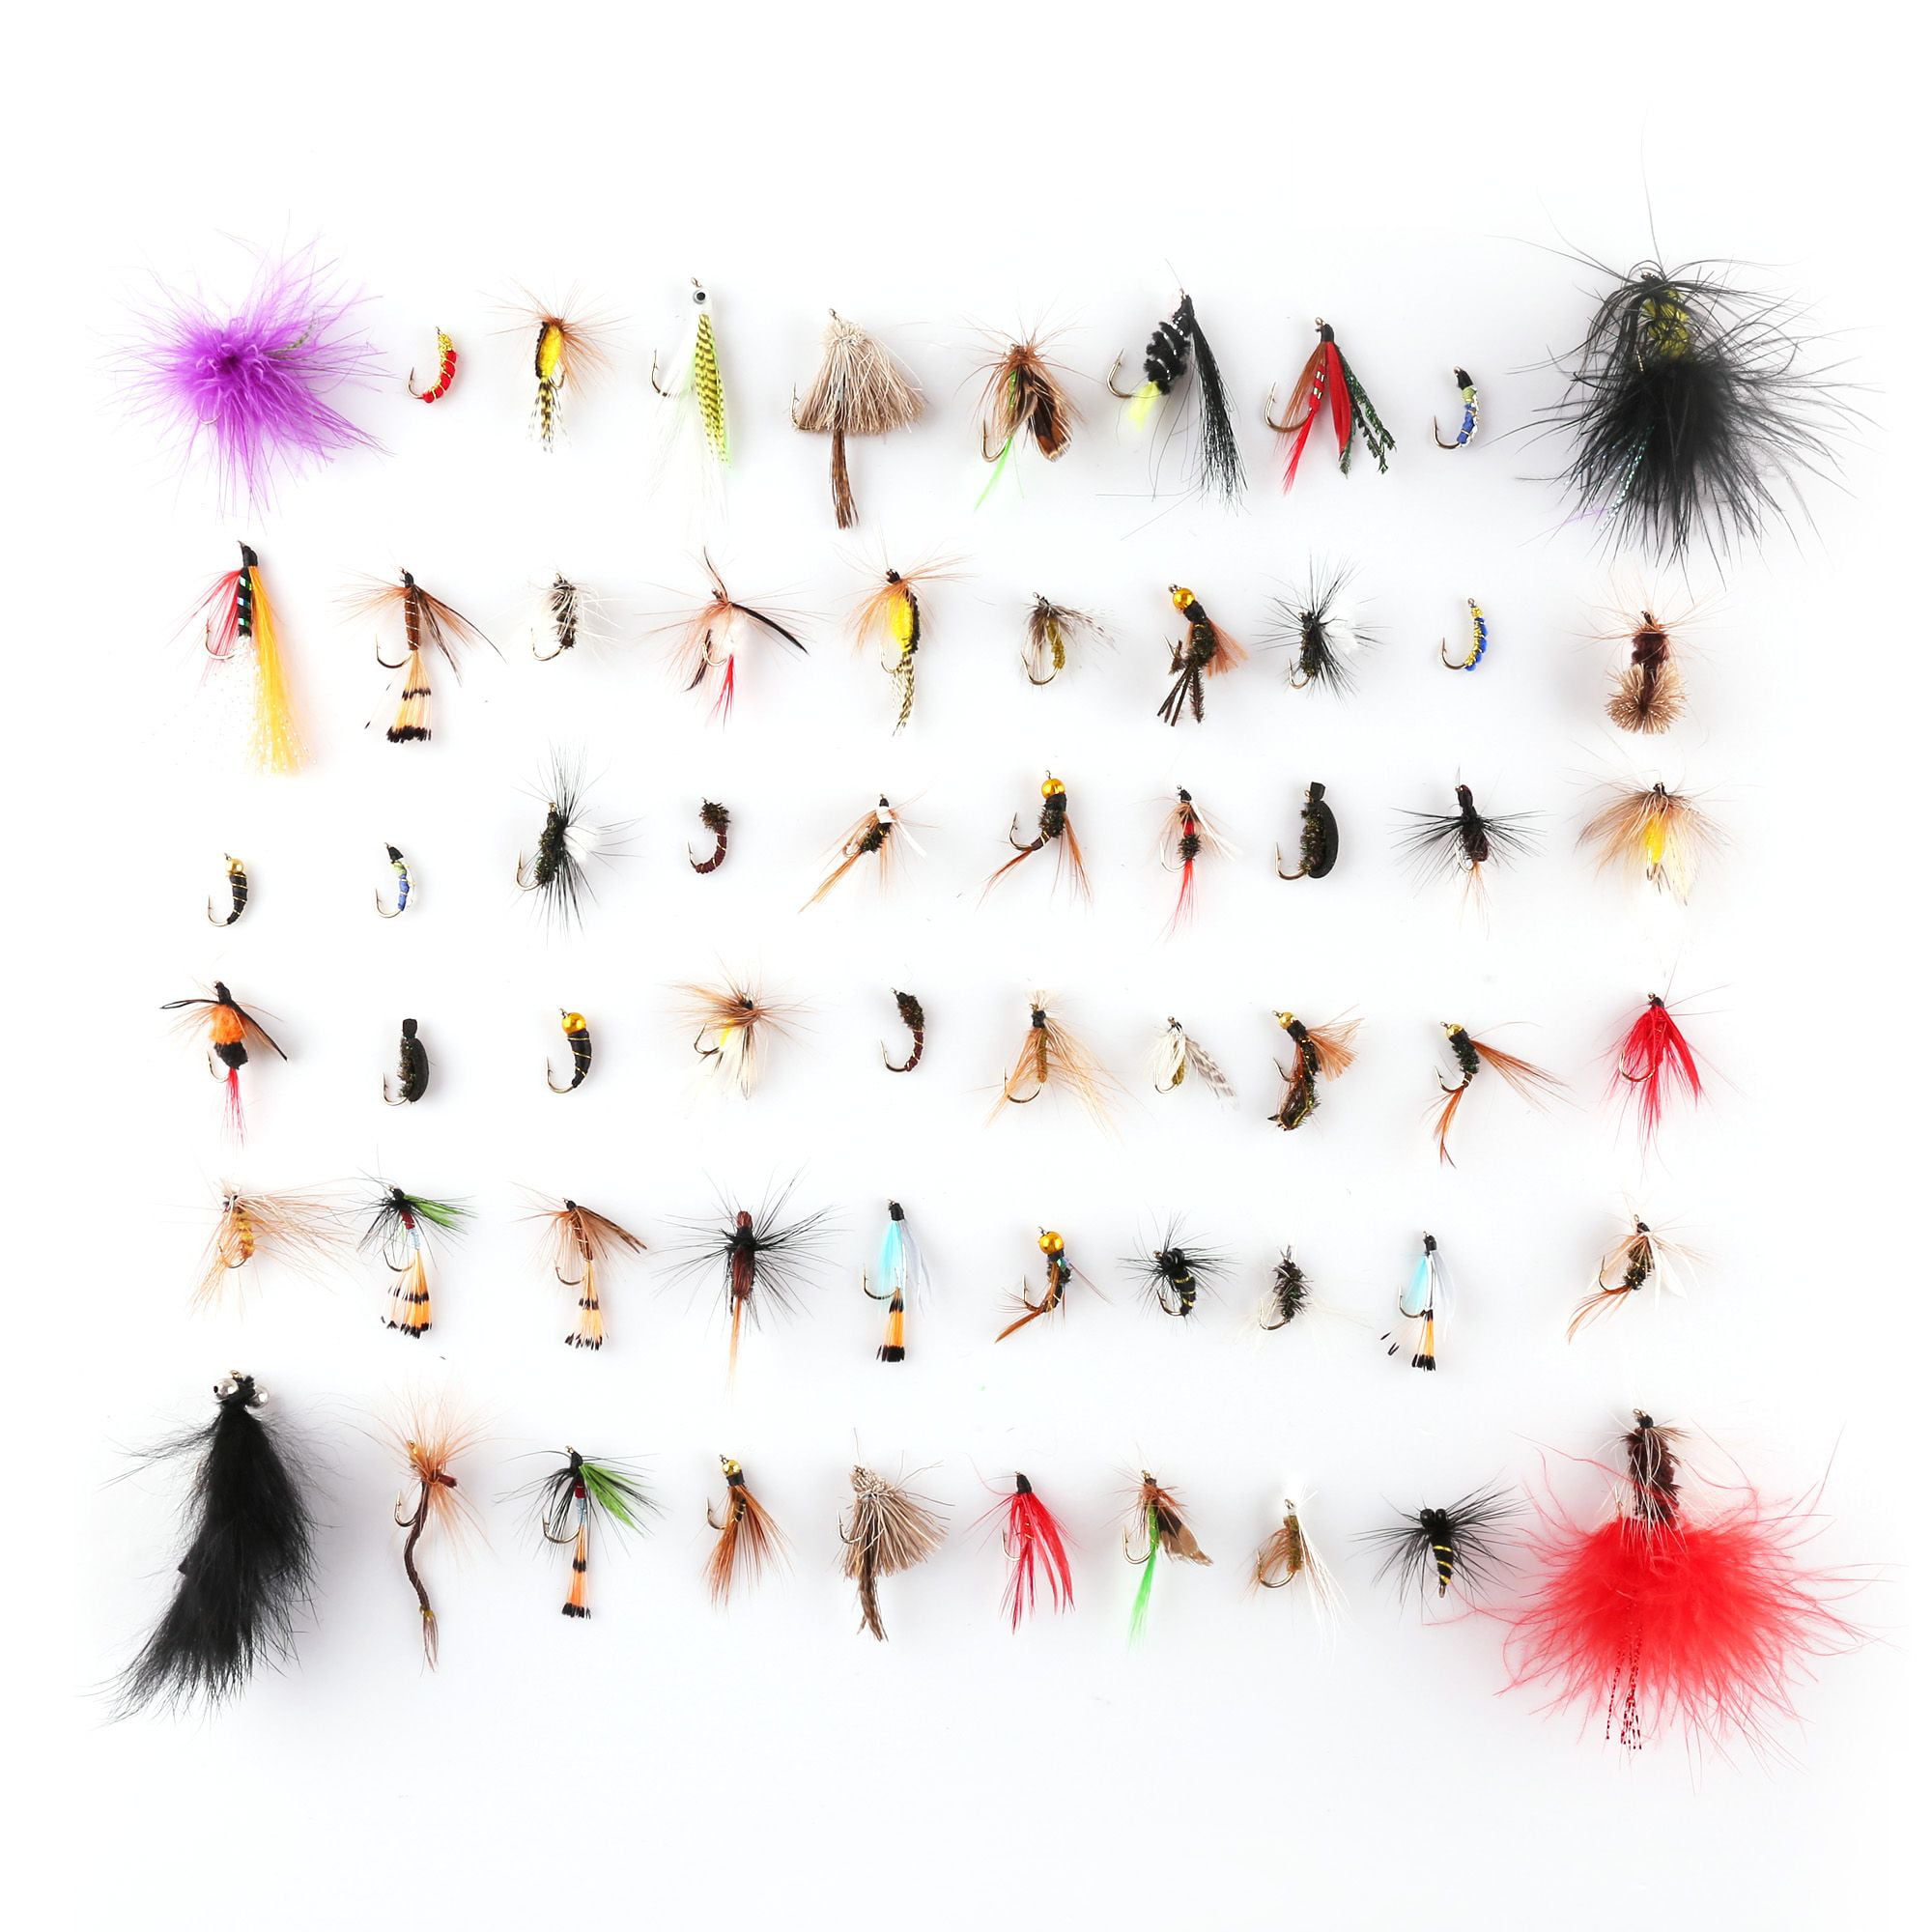 Lot of 50 Fly Fishing Lures New & Vintage Mixed Lot Flies Nymph Wet Dry  +Case